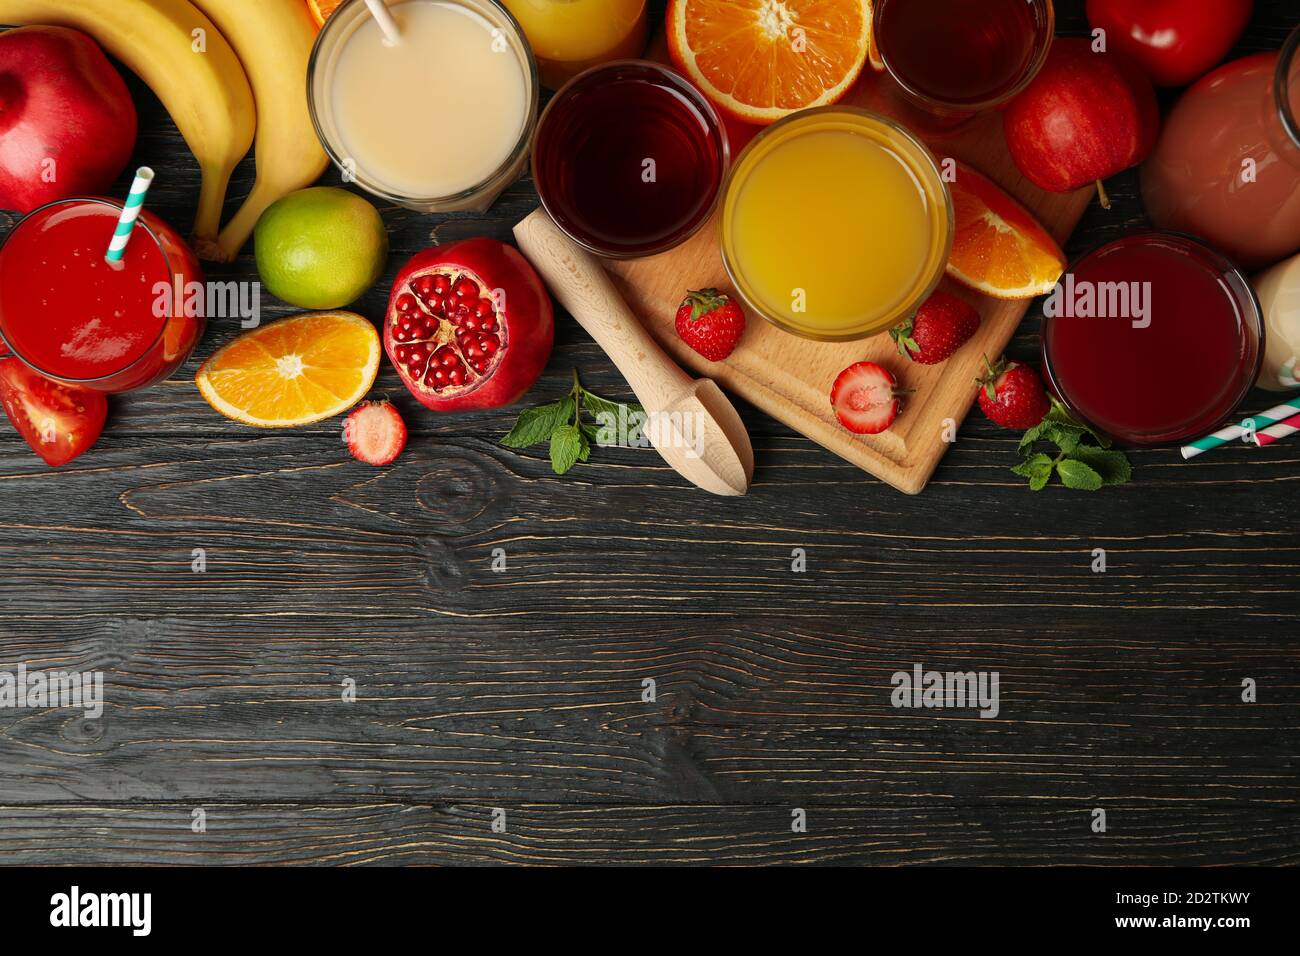 Glasses and jars with different juices on wooden background Stock Photo